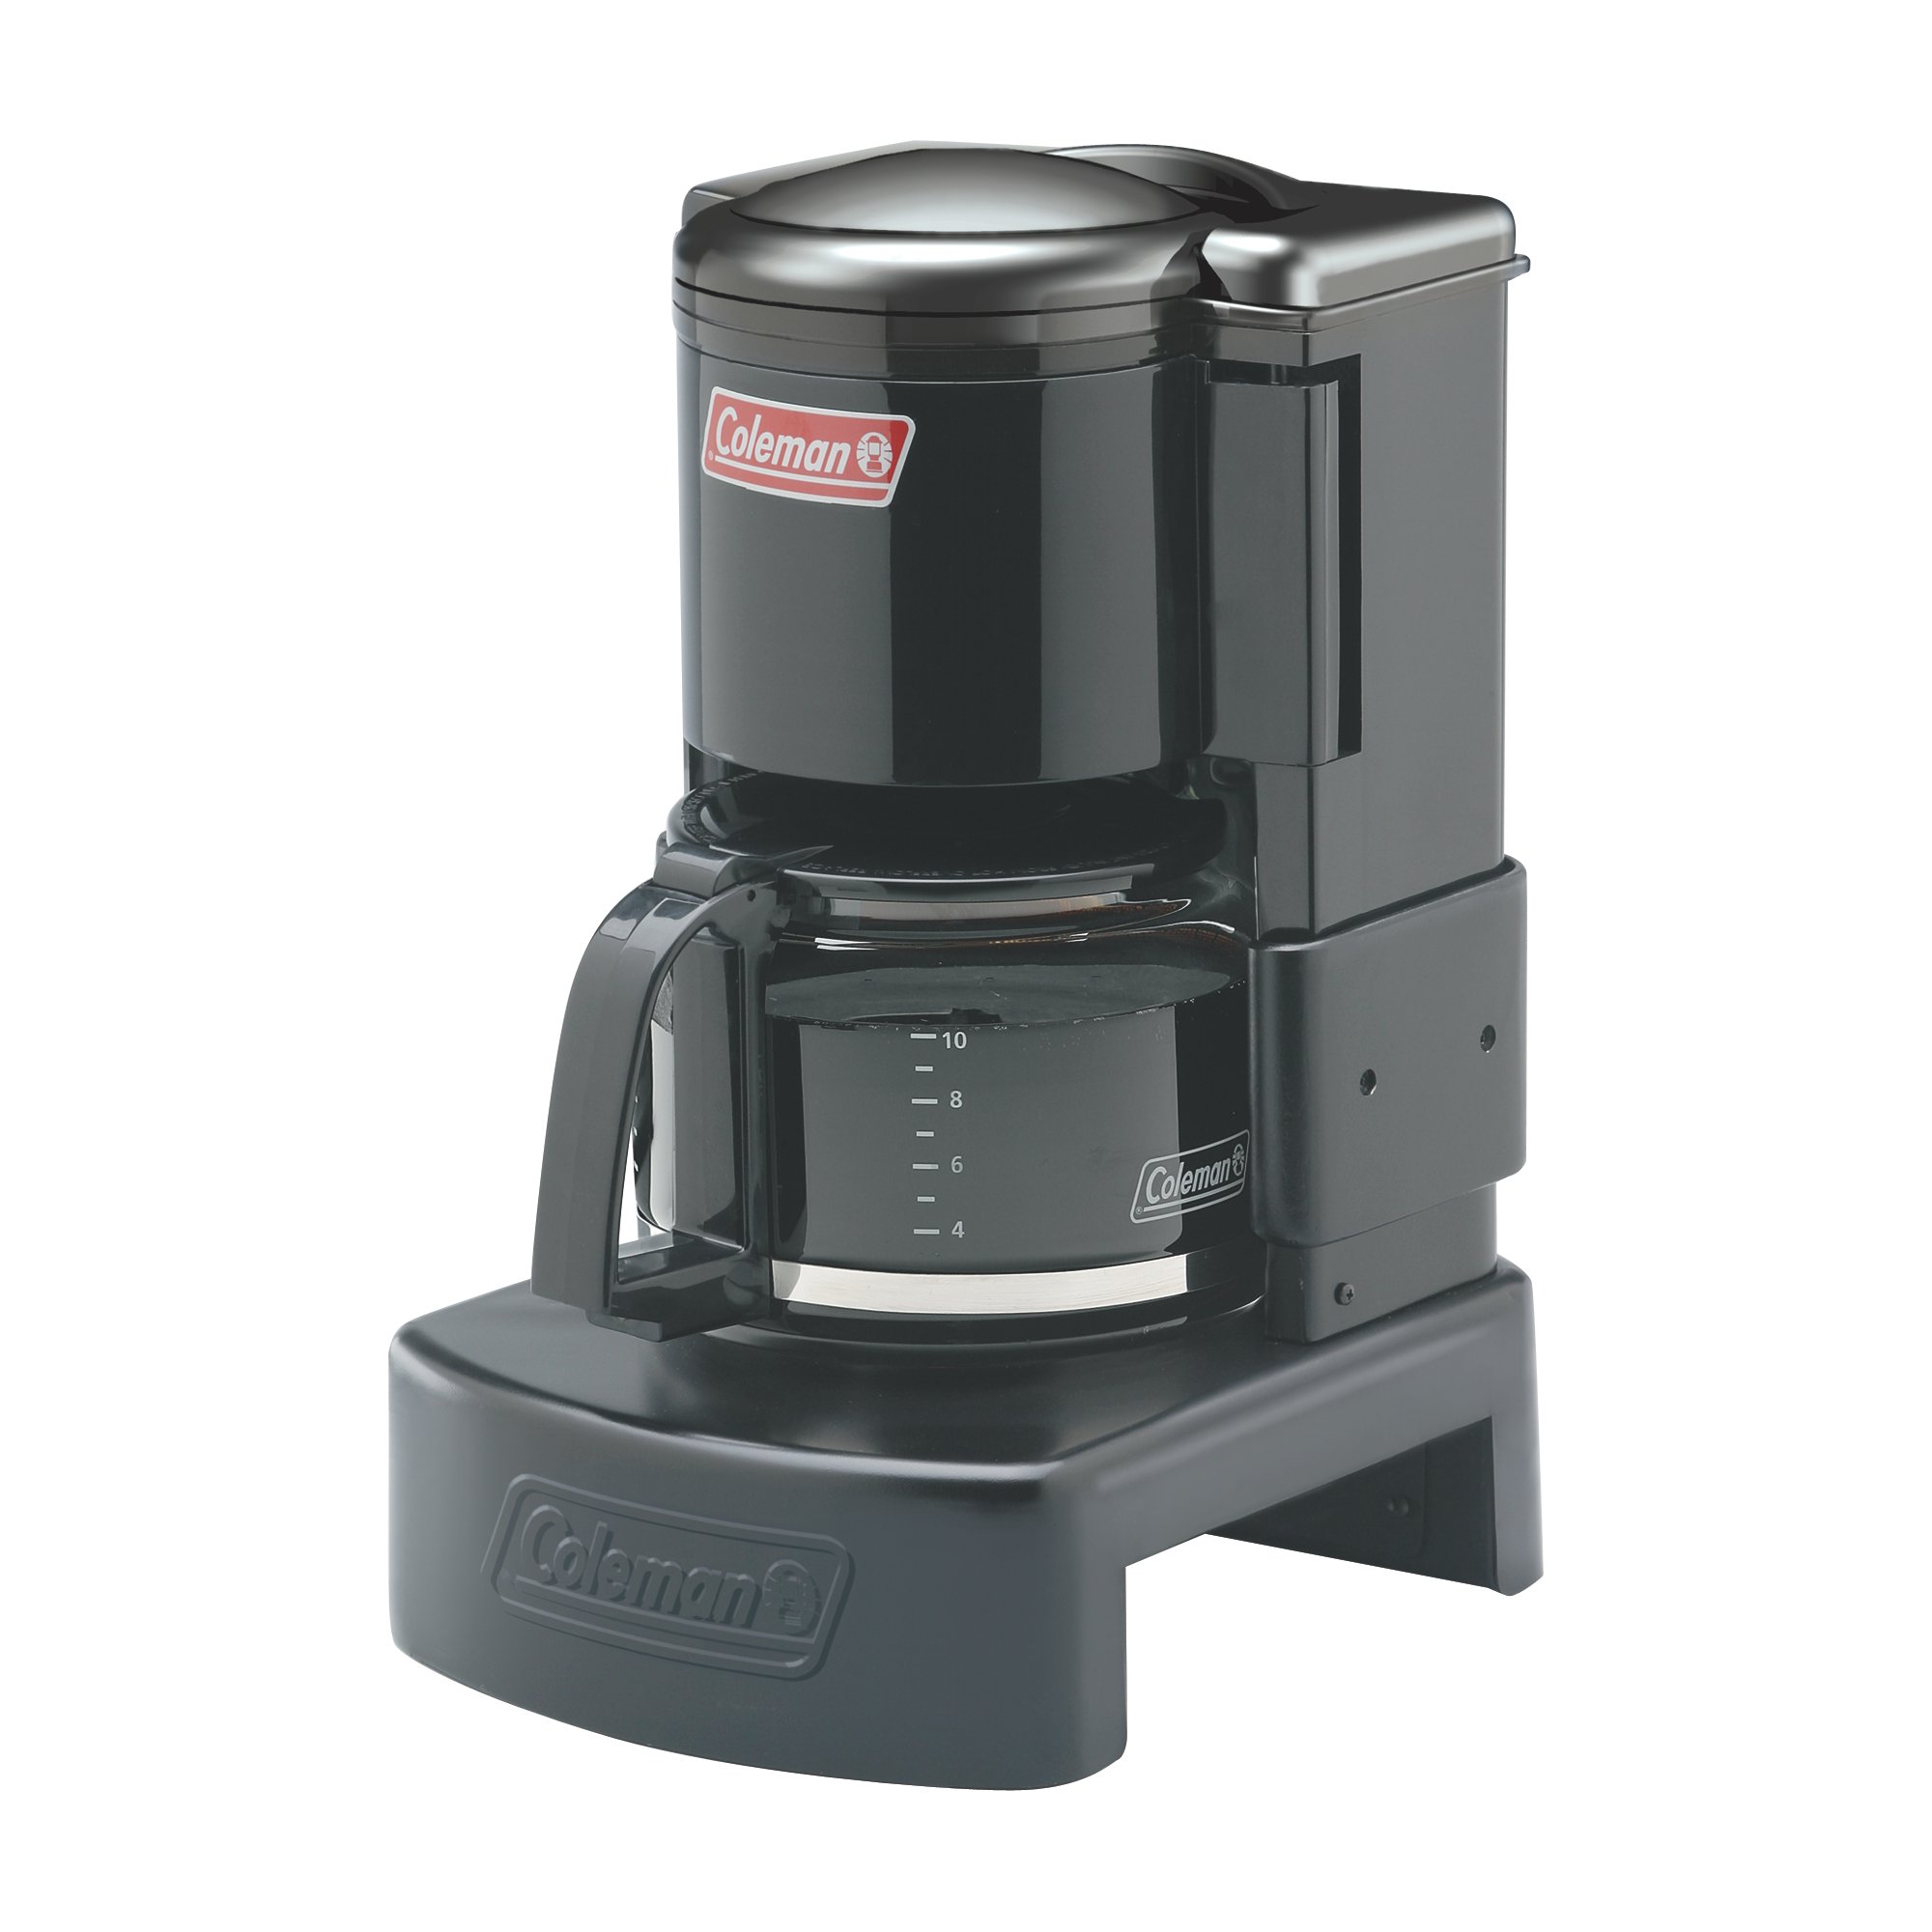 Coleman 10-Cup Portable Propane Coffee Maker with Stainless Steel Carafe -  The Gadgeteer